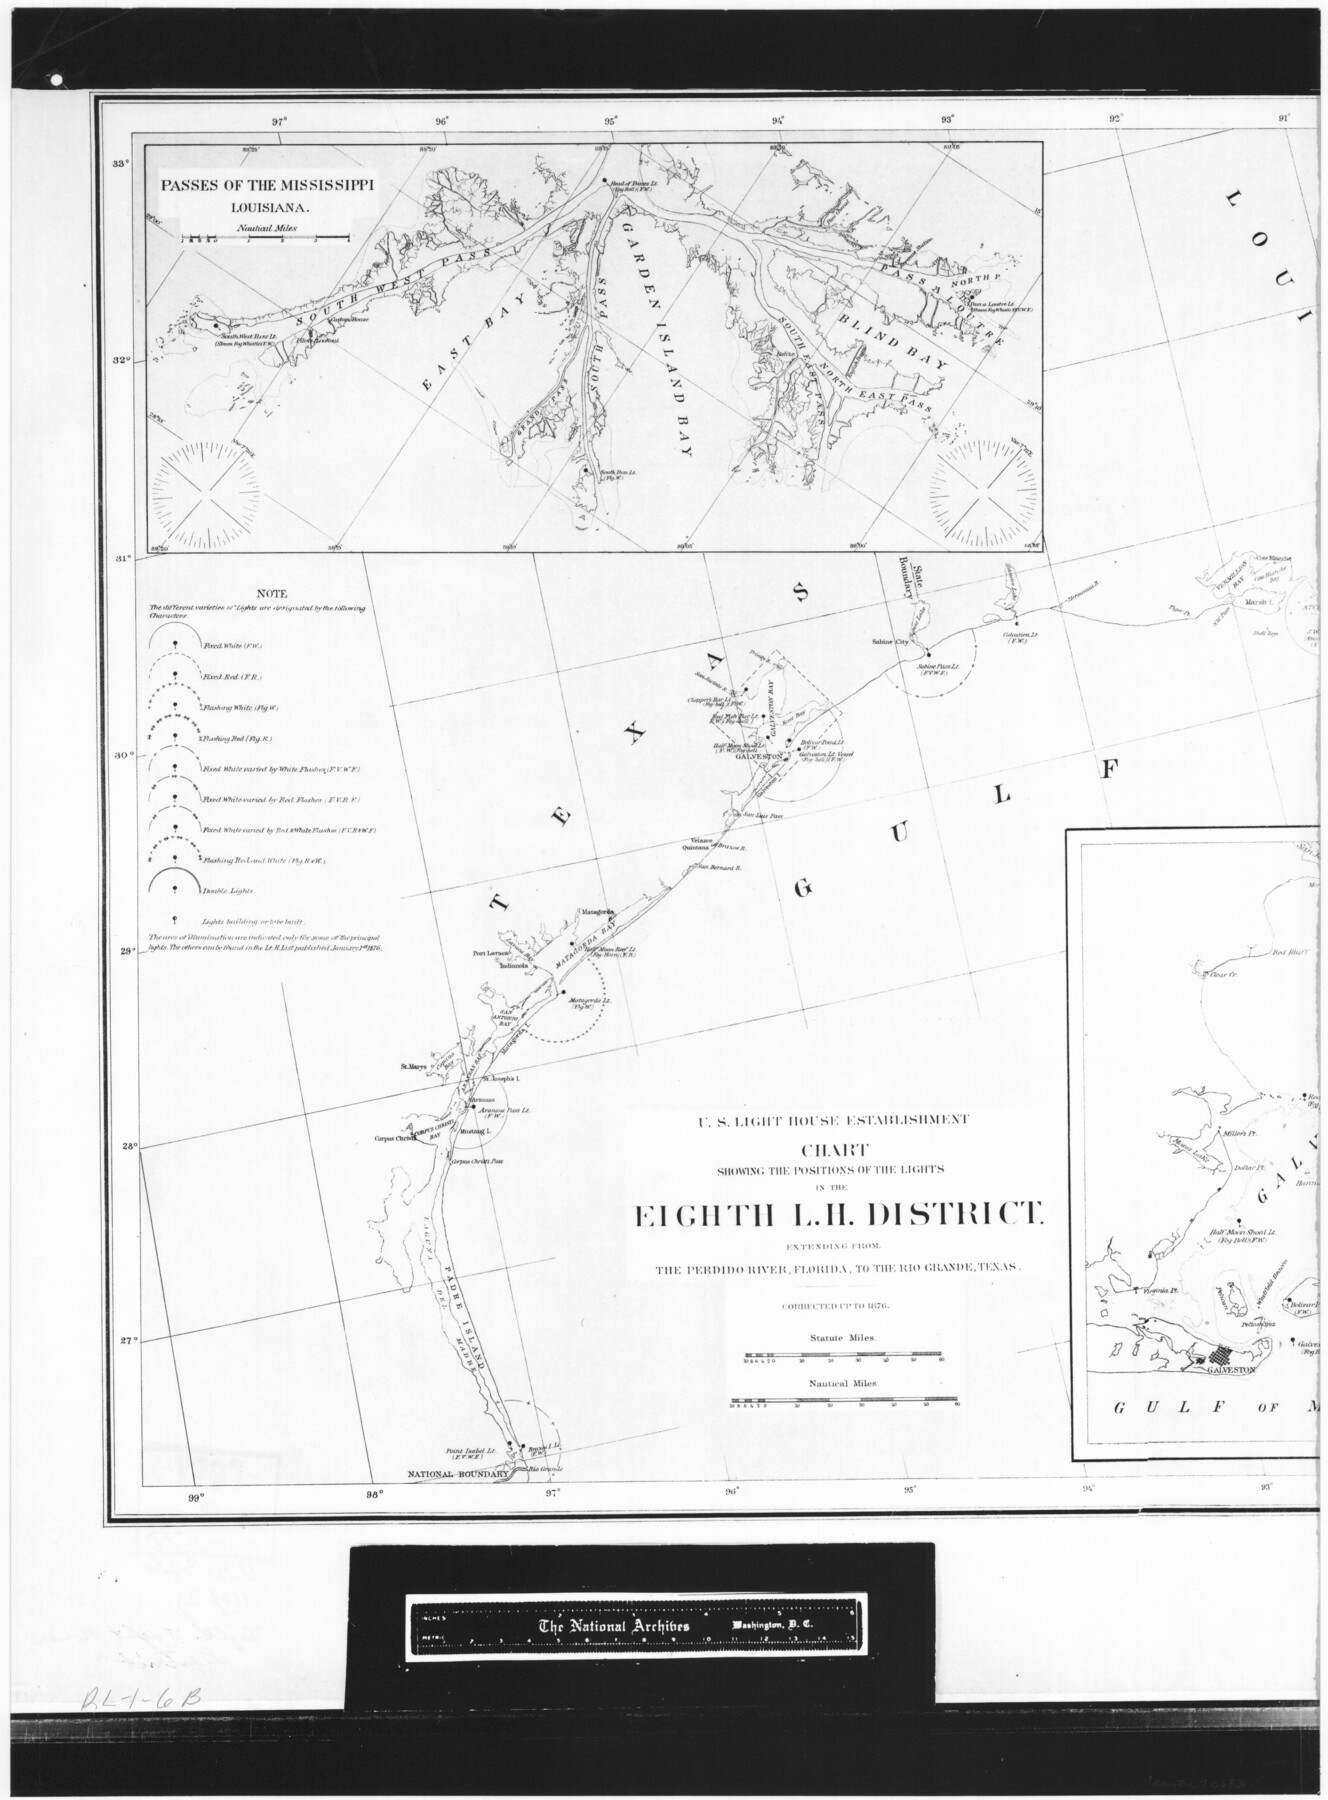 72682, Chart showing the positions of the lights in the Eighth L. H. District extending from the Perdido River, Florida to the Rio Grande, Texas, General Map Collection